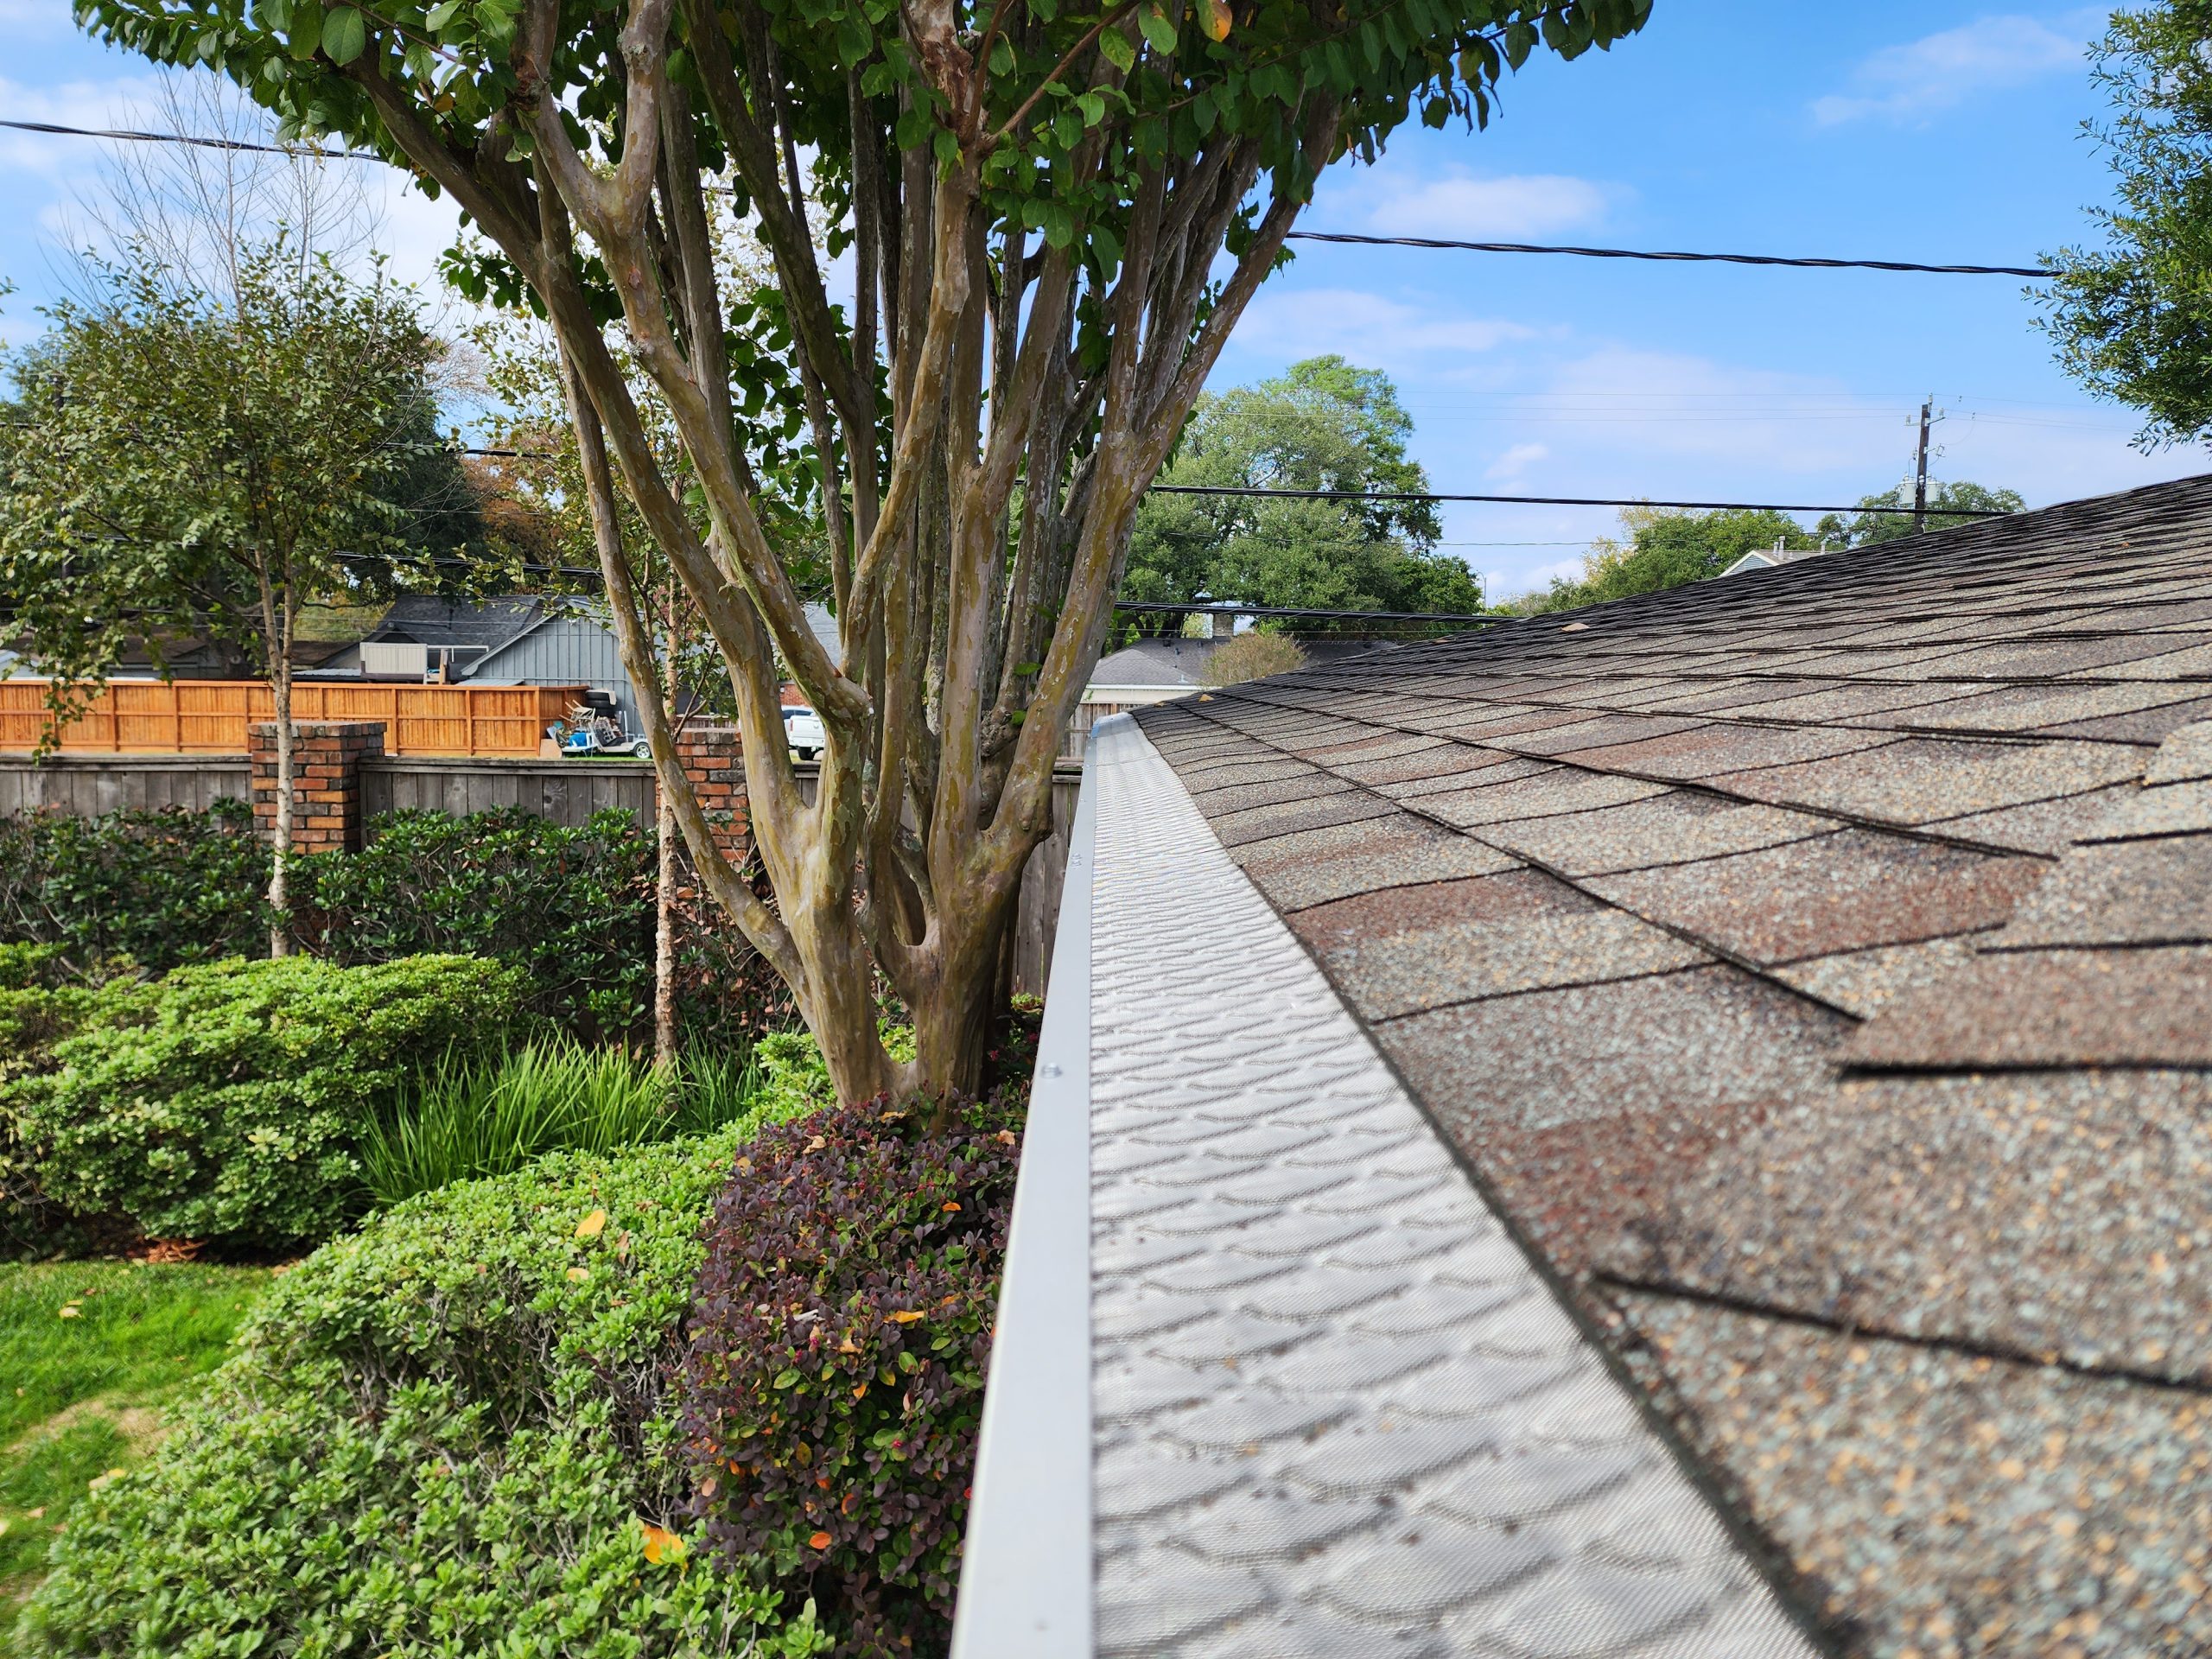 contact us to learn more about gutter guards to protect your home